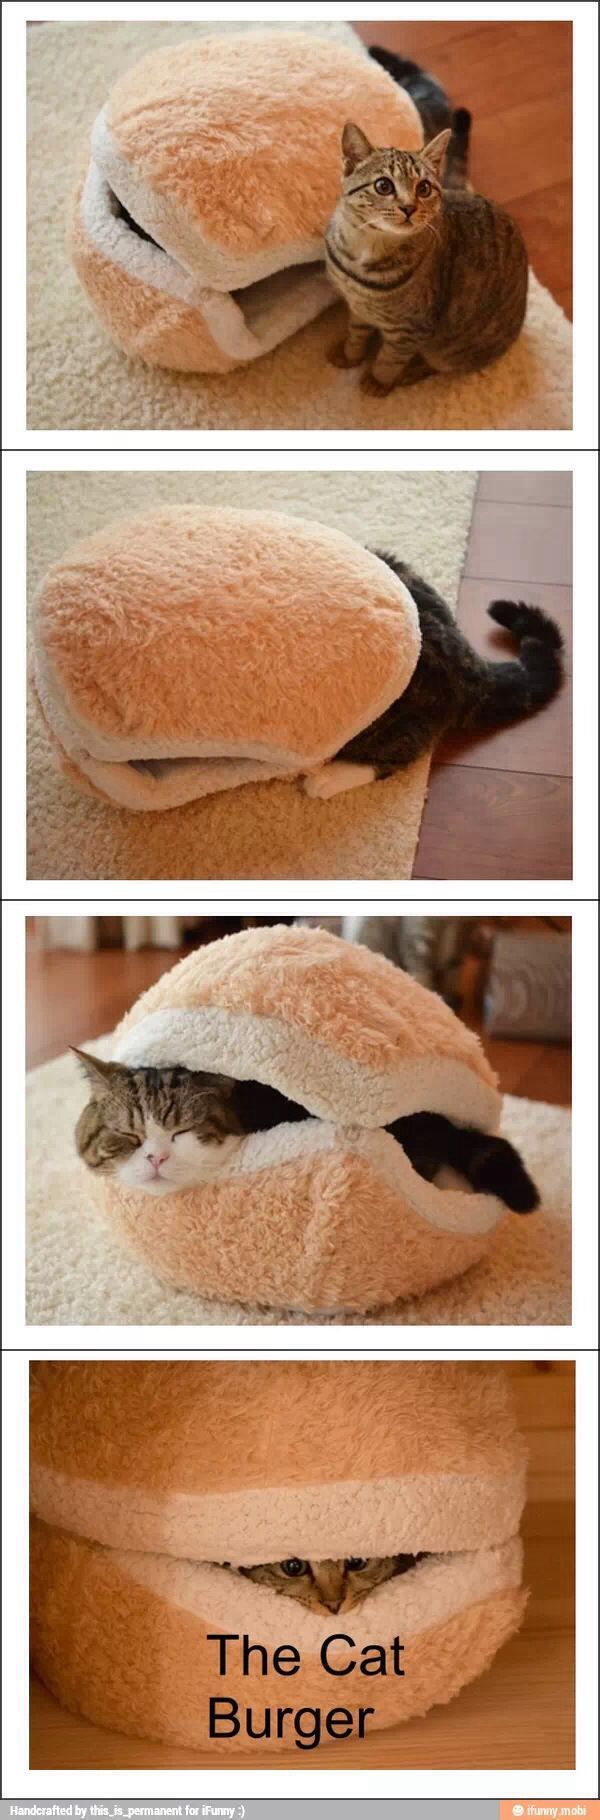 The One And Only Cat Burger - meme